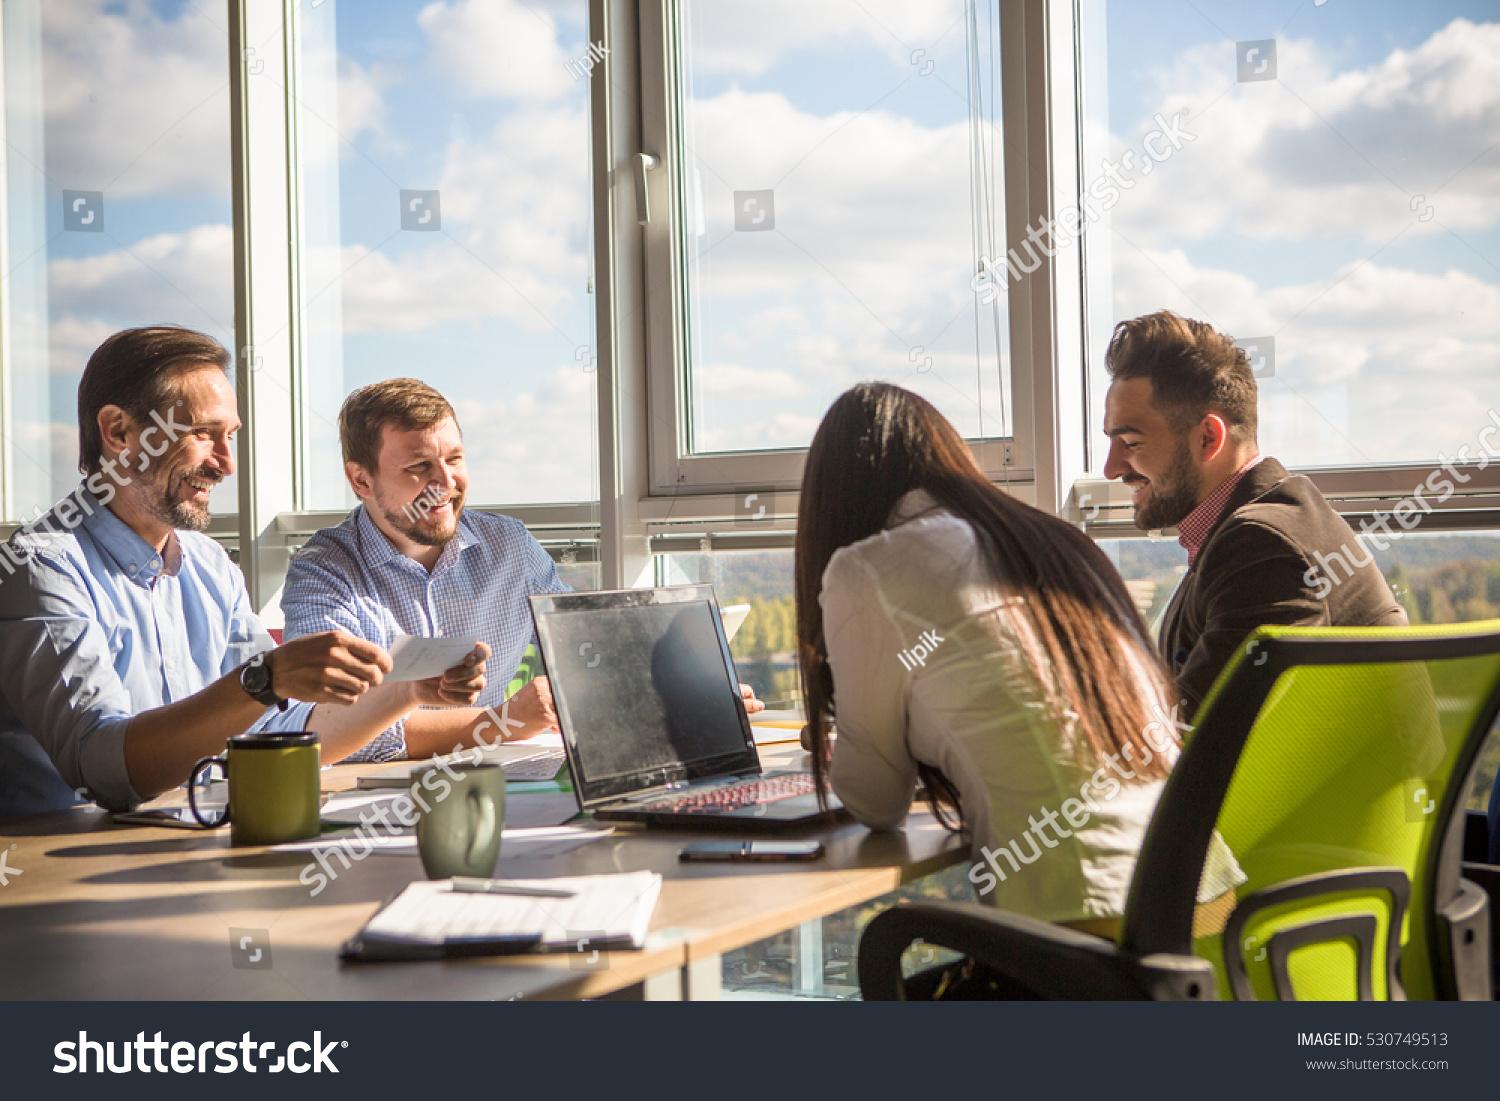 Business People Having Round Table While Stock Photo (Edit Now ...